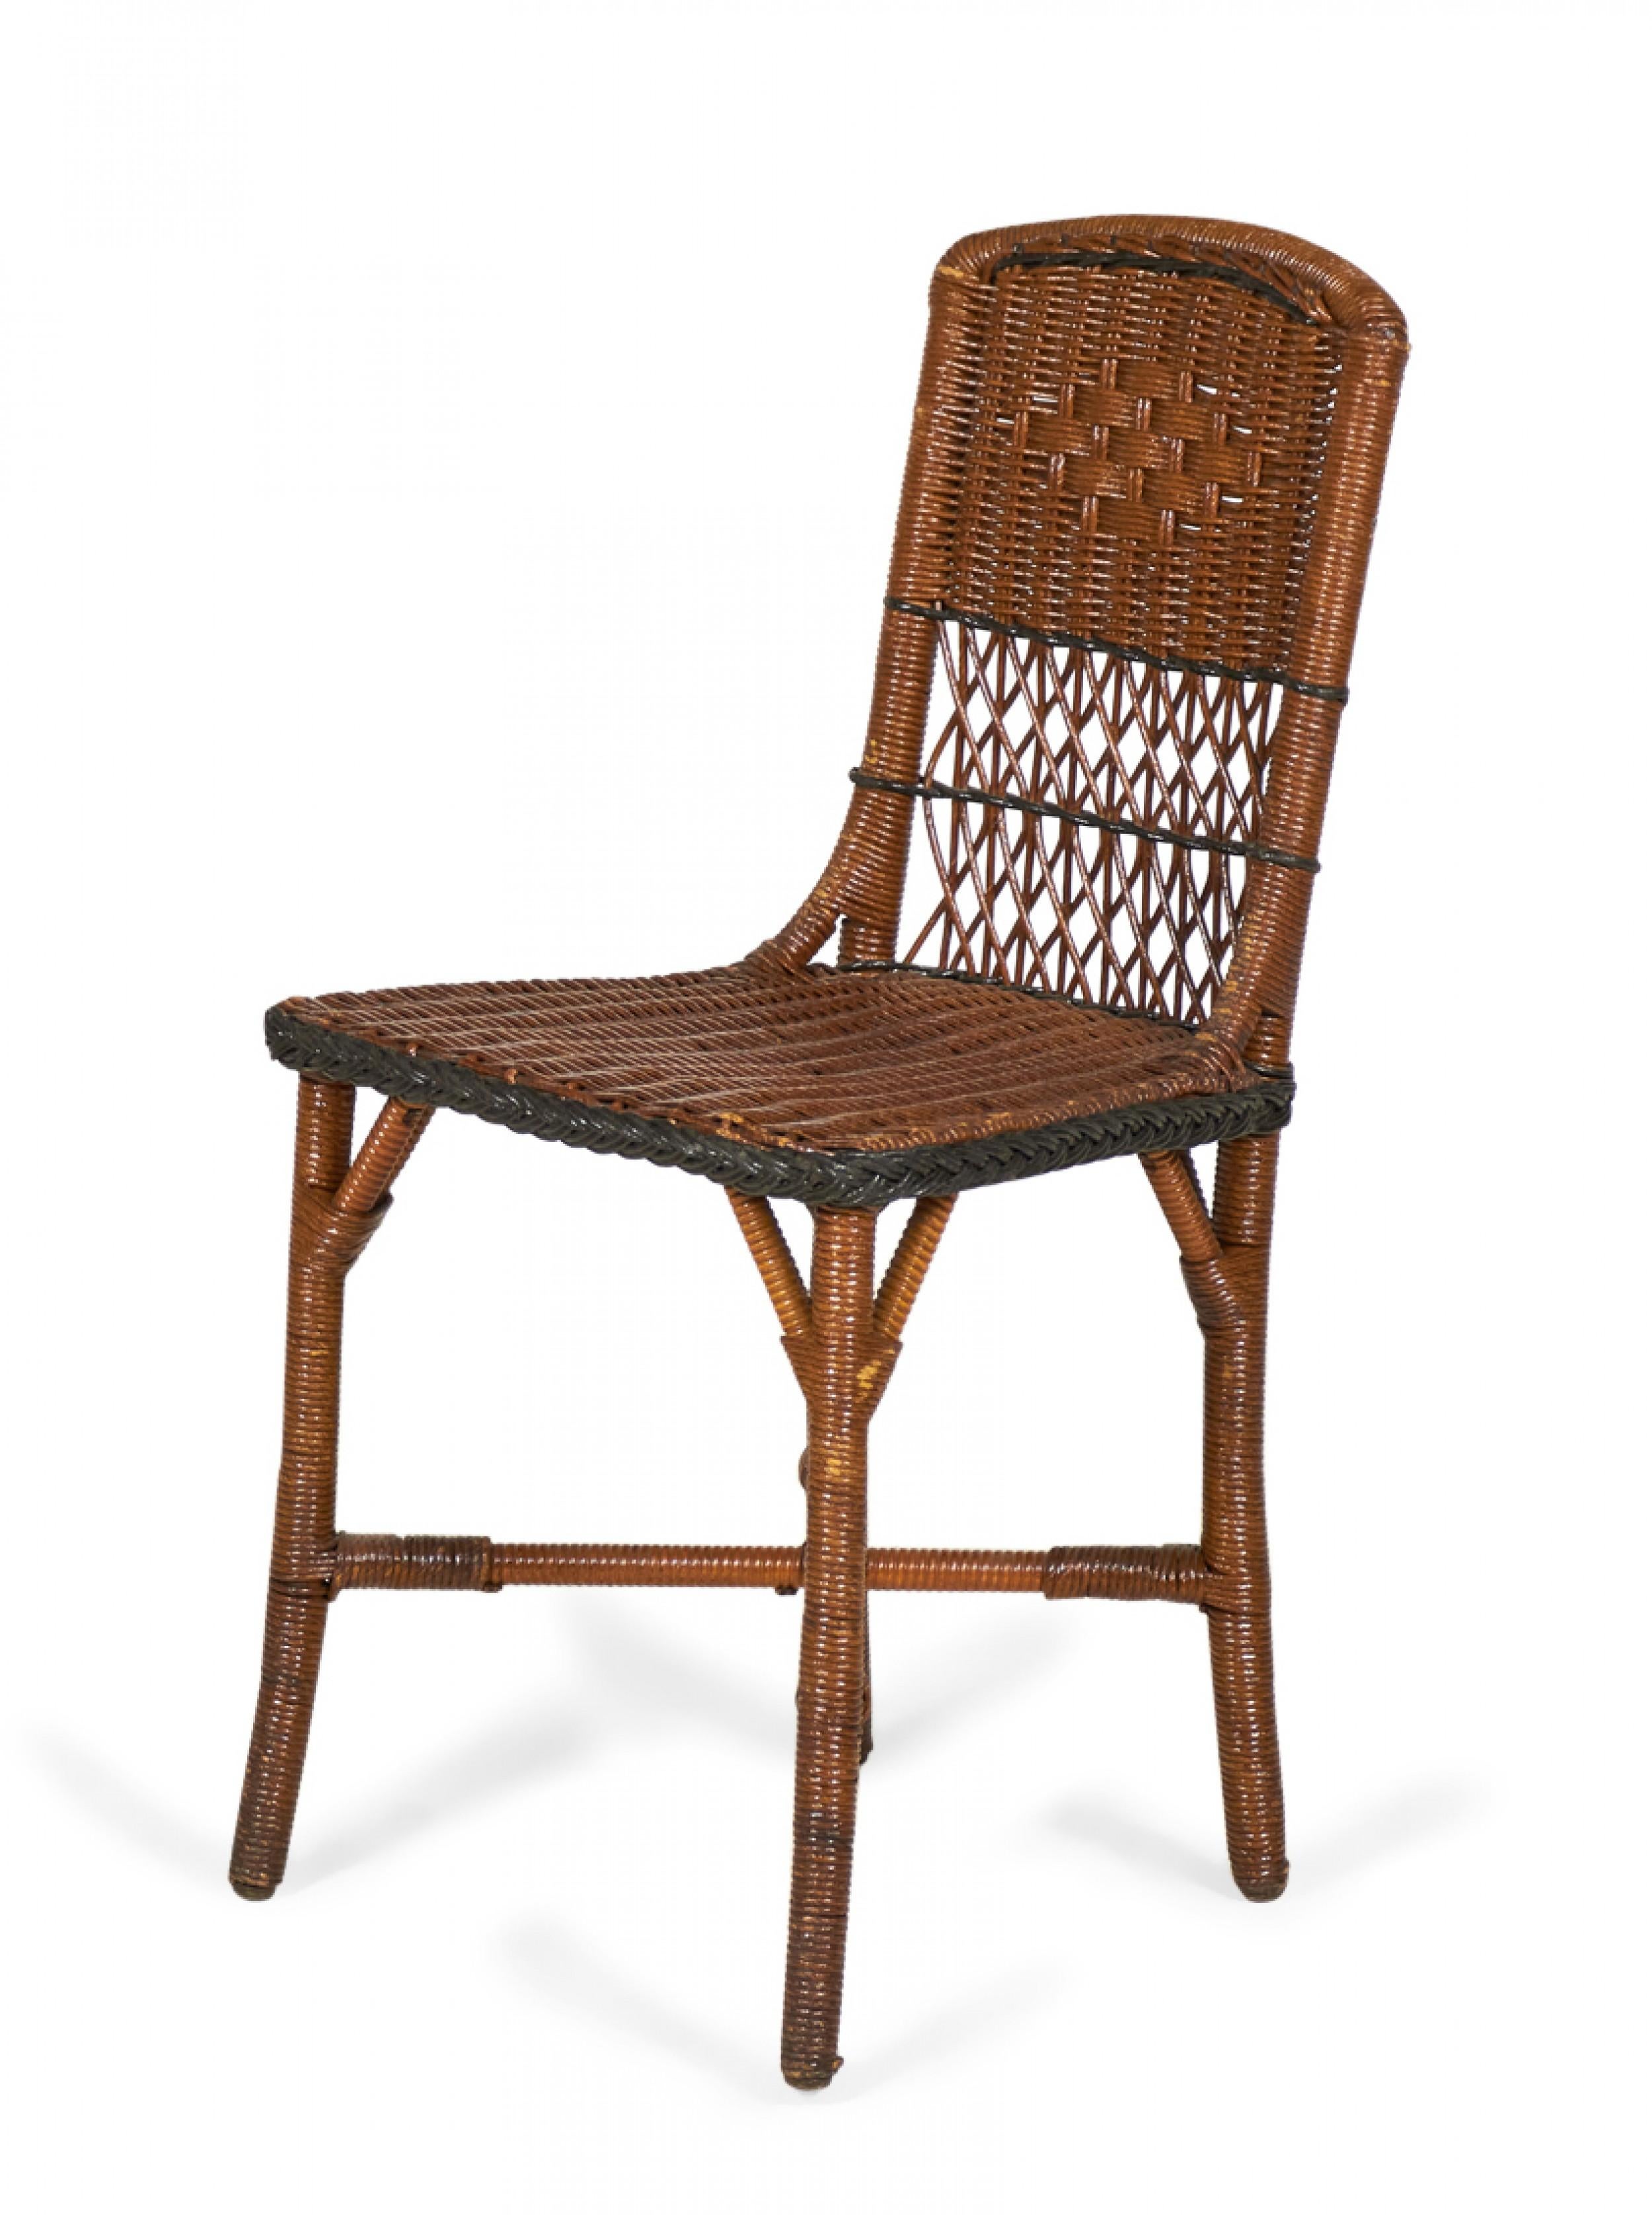 18 American Art Deco-style (1940s) brown wicker side chairs having square backs with a woven diamond pattern above a filigree design with green braided wicker trim. (SHEBOYGAN FIBRE FURNITURE CO label)(priced each).